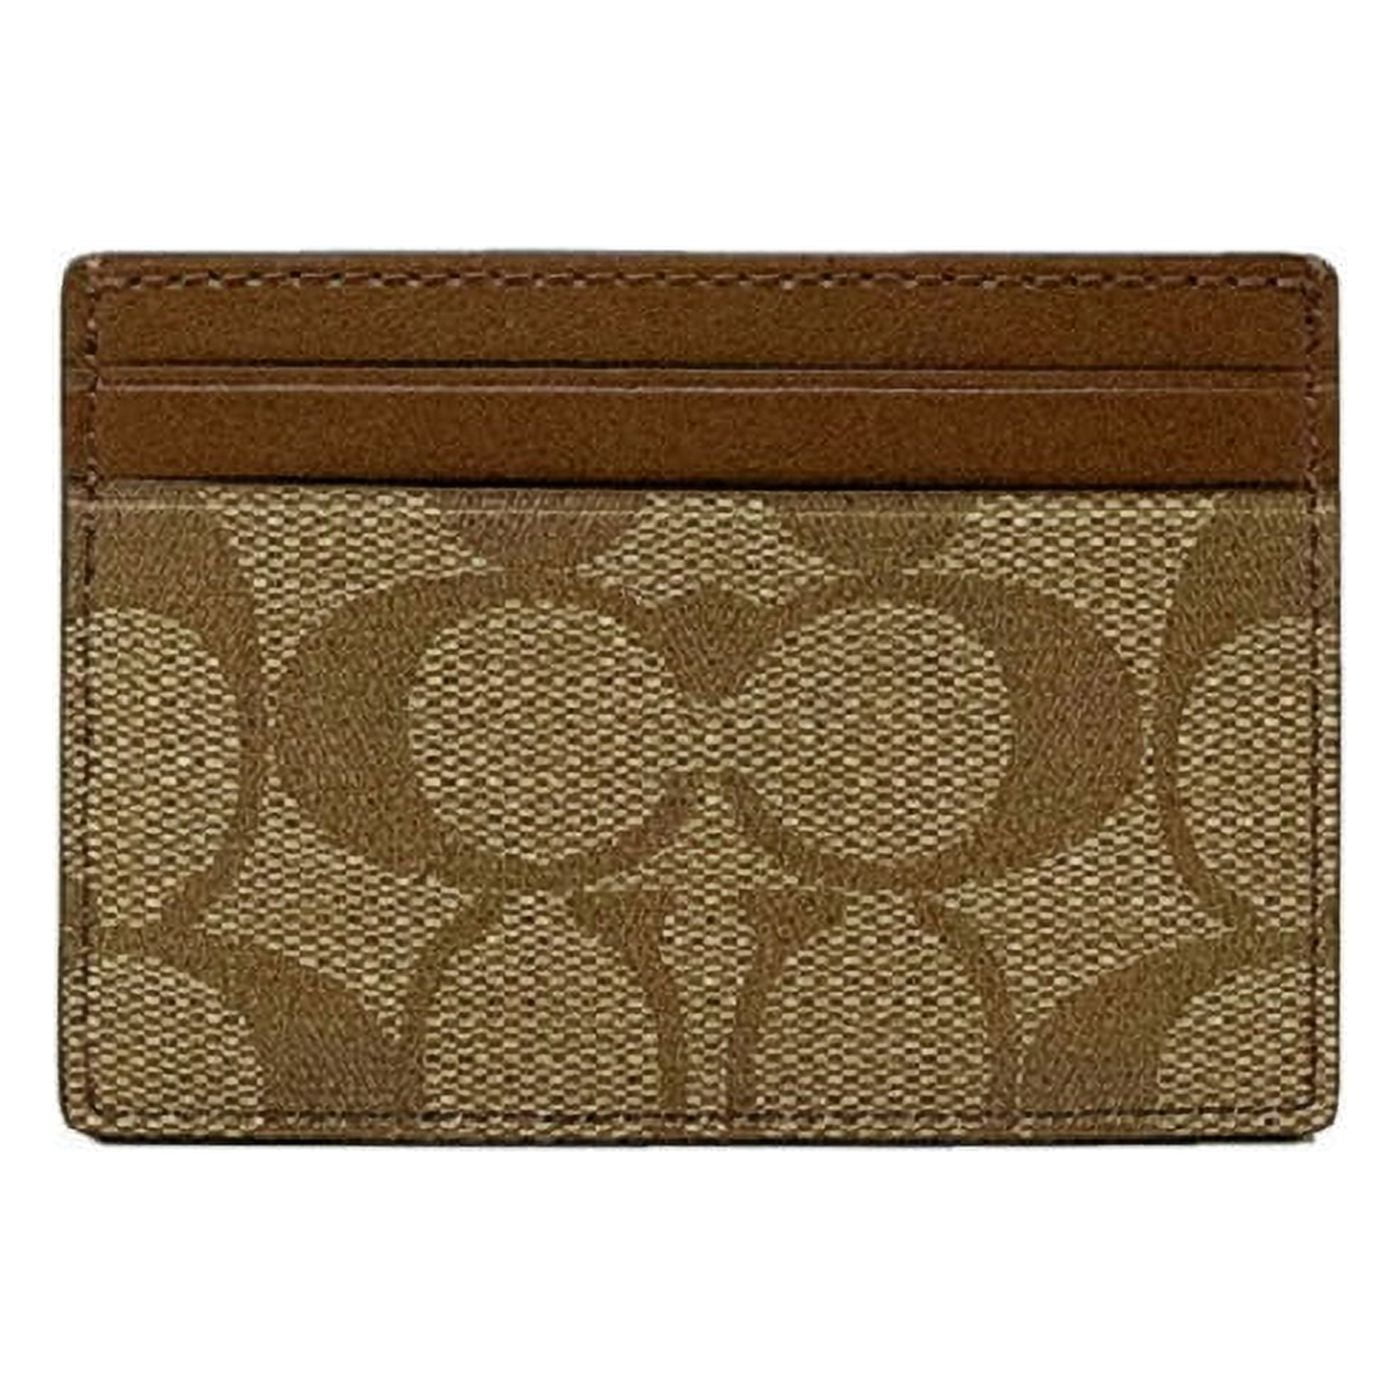 Coach Multifunction Card Case in Signature Canvas